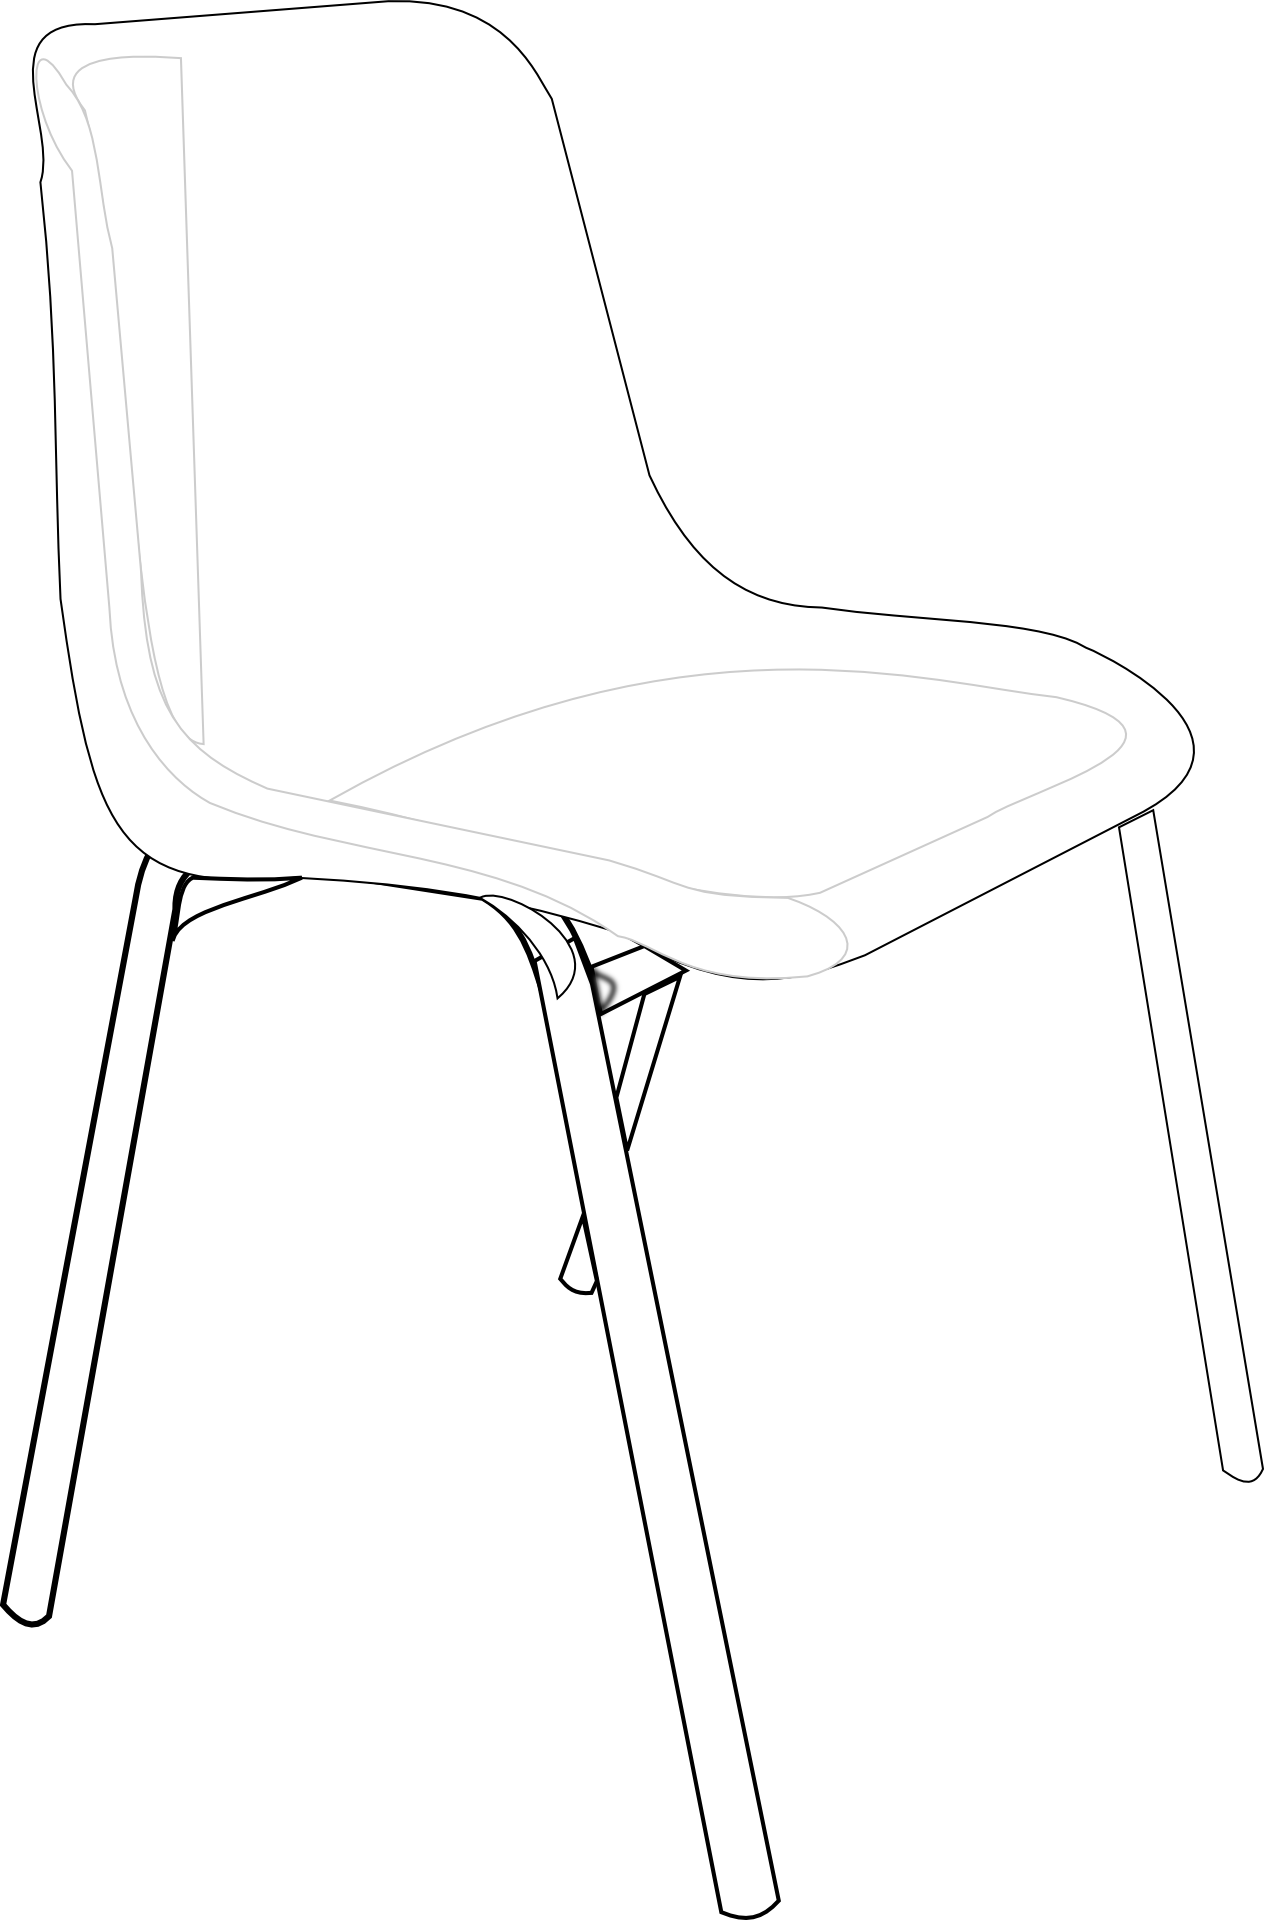 Chair outline,furniture free vector